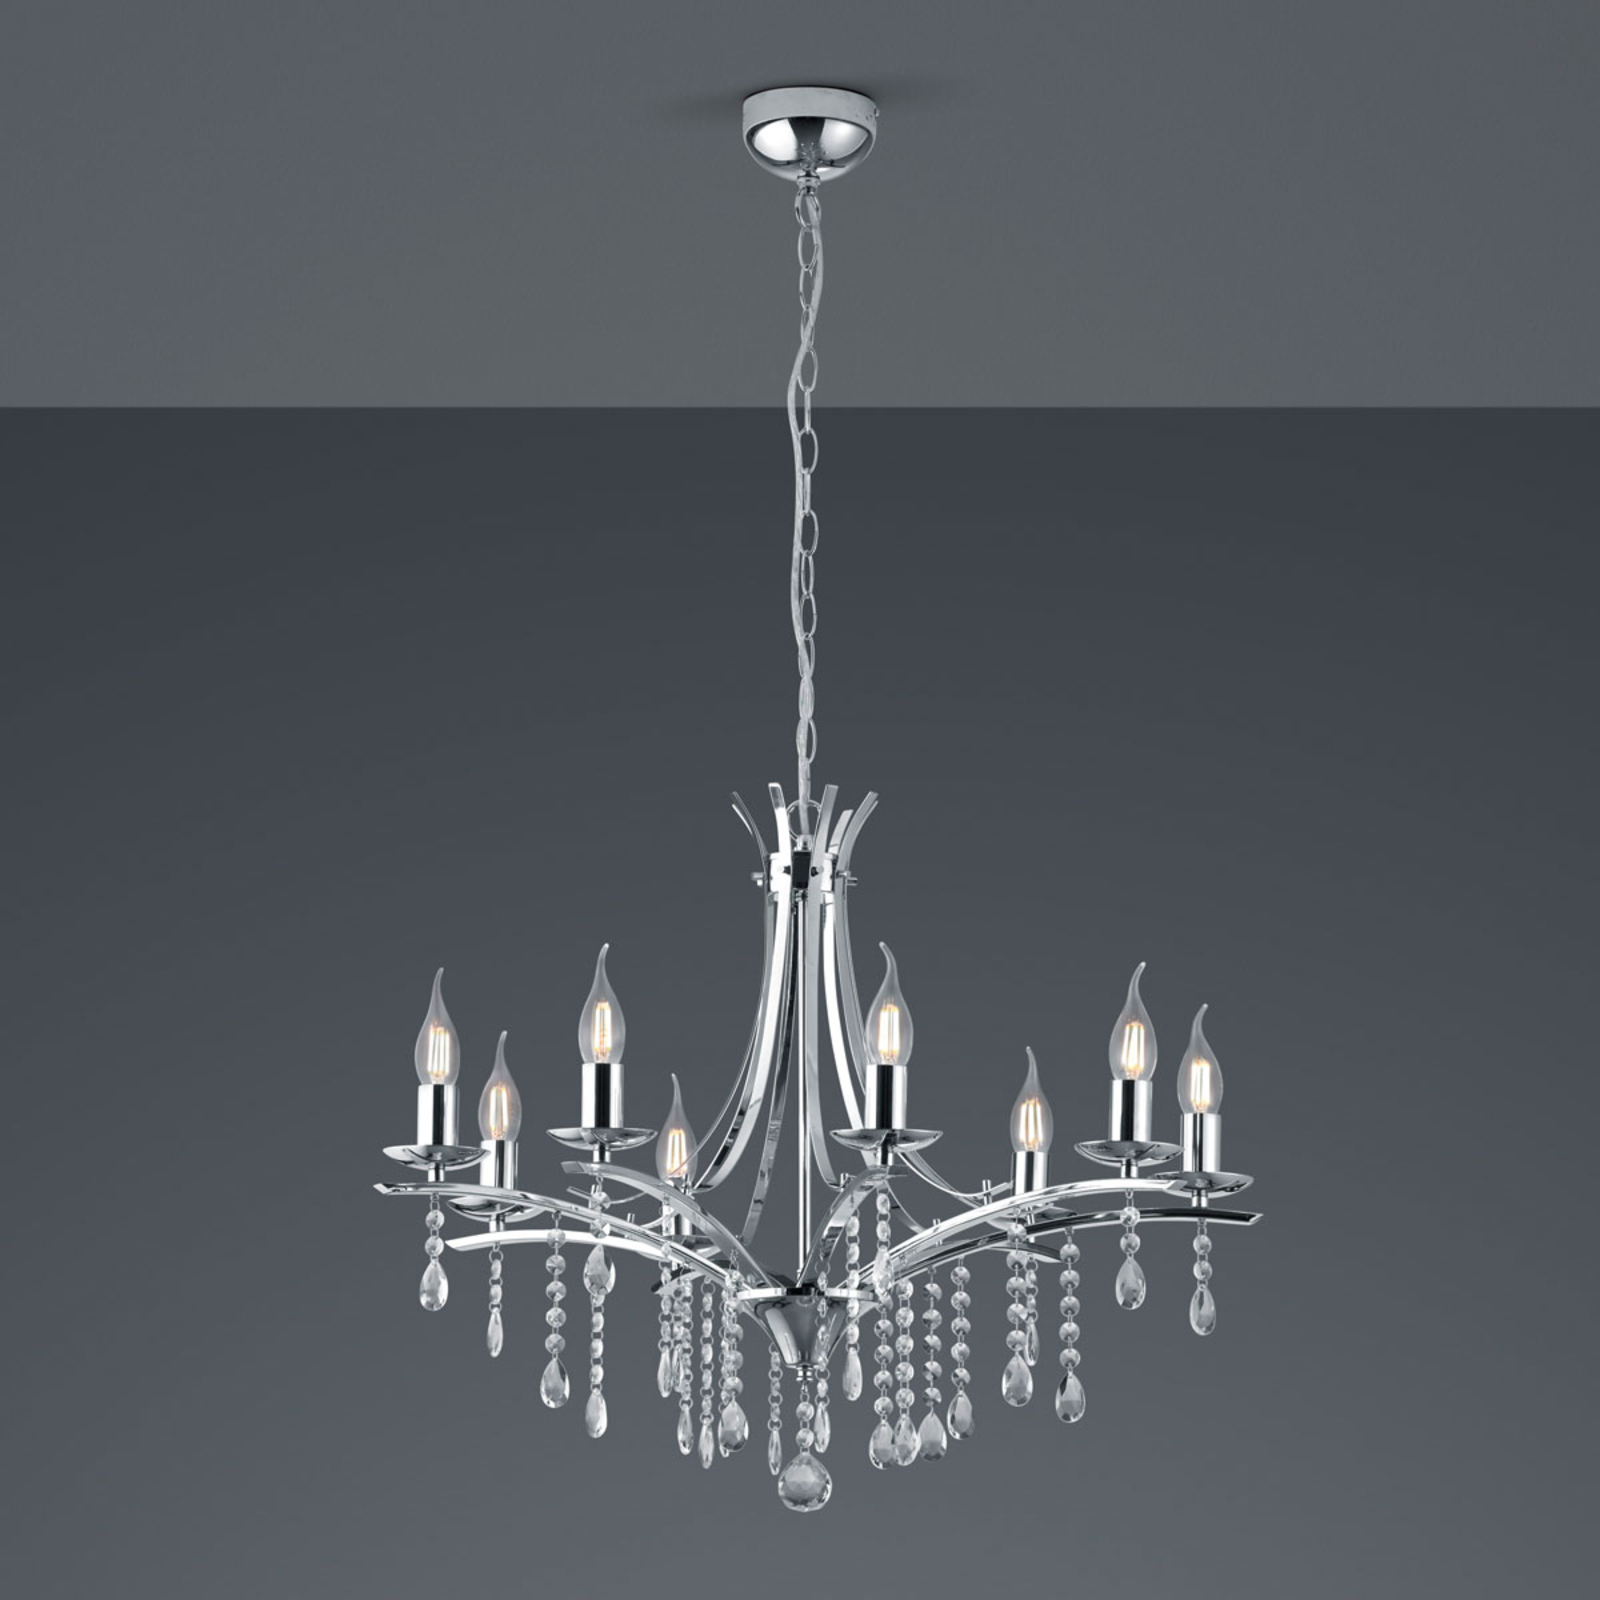 Lucerna chandelier with glass elements, eight-bulb